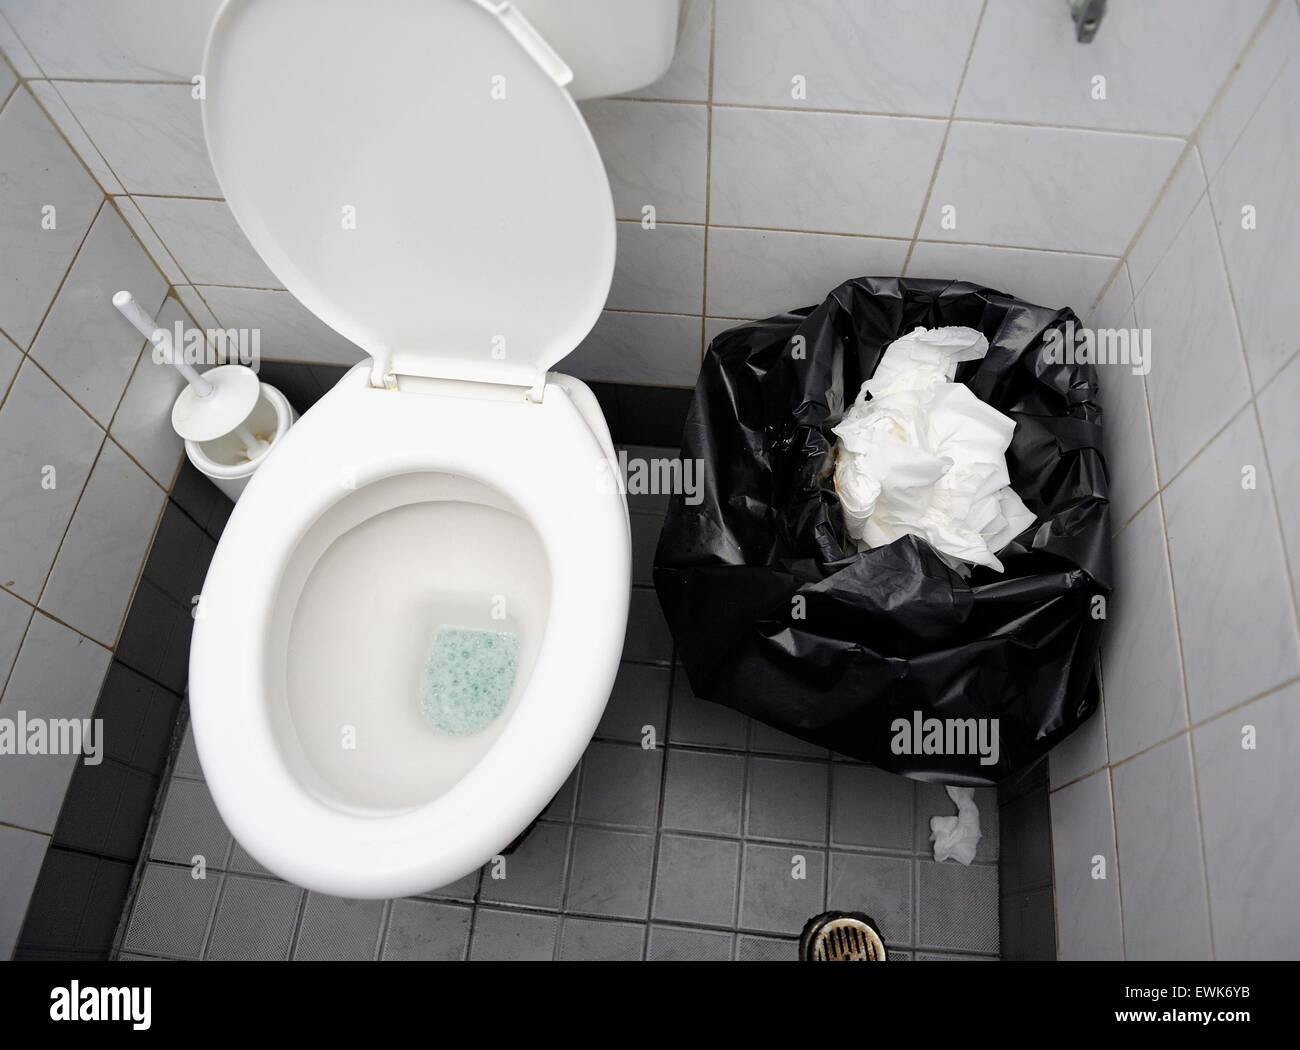 A typical greek toilet with a bin to put used toilet paper in. Stock Photo